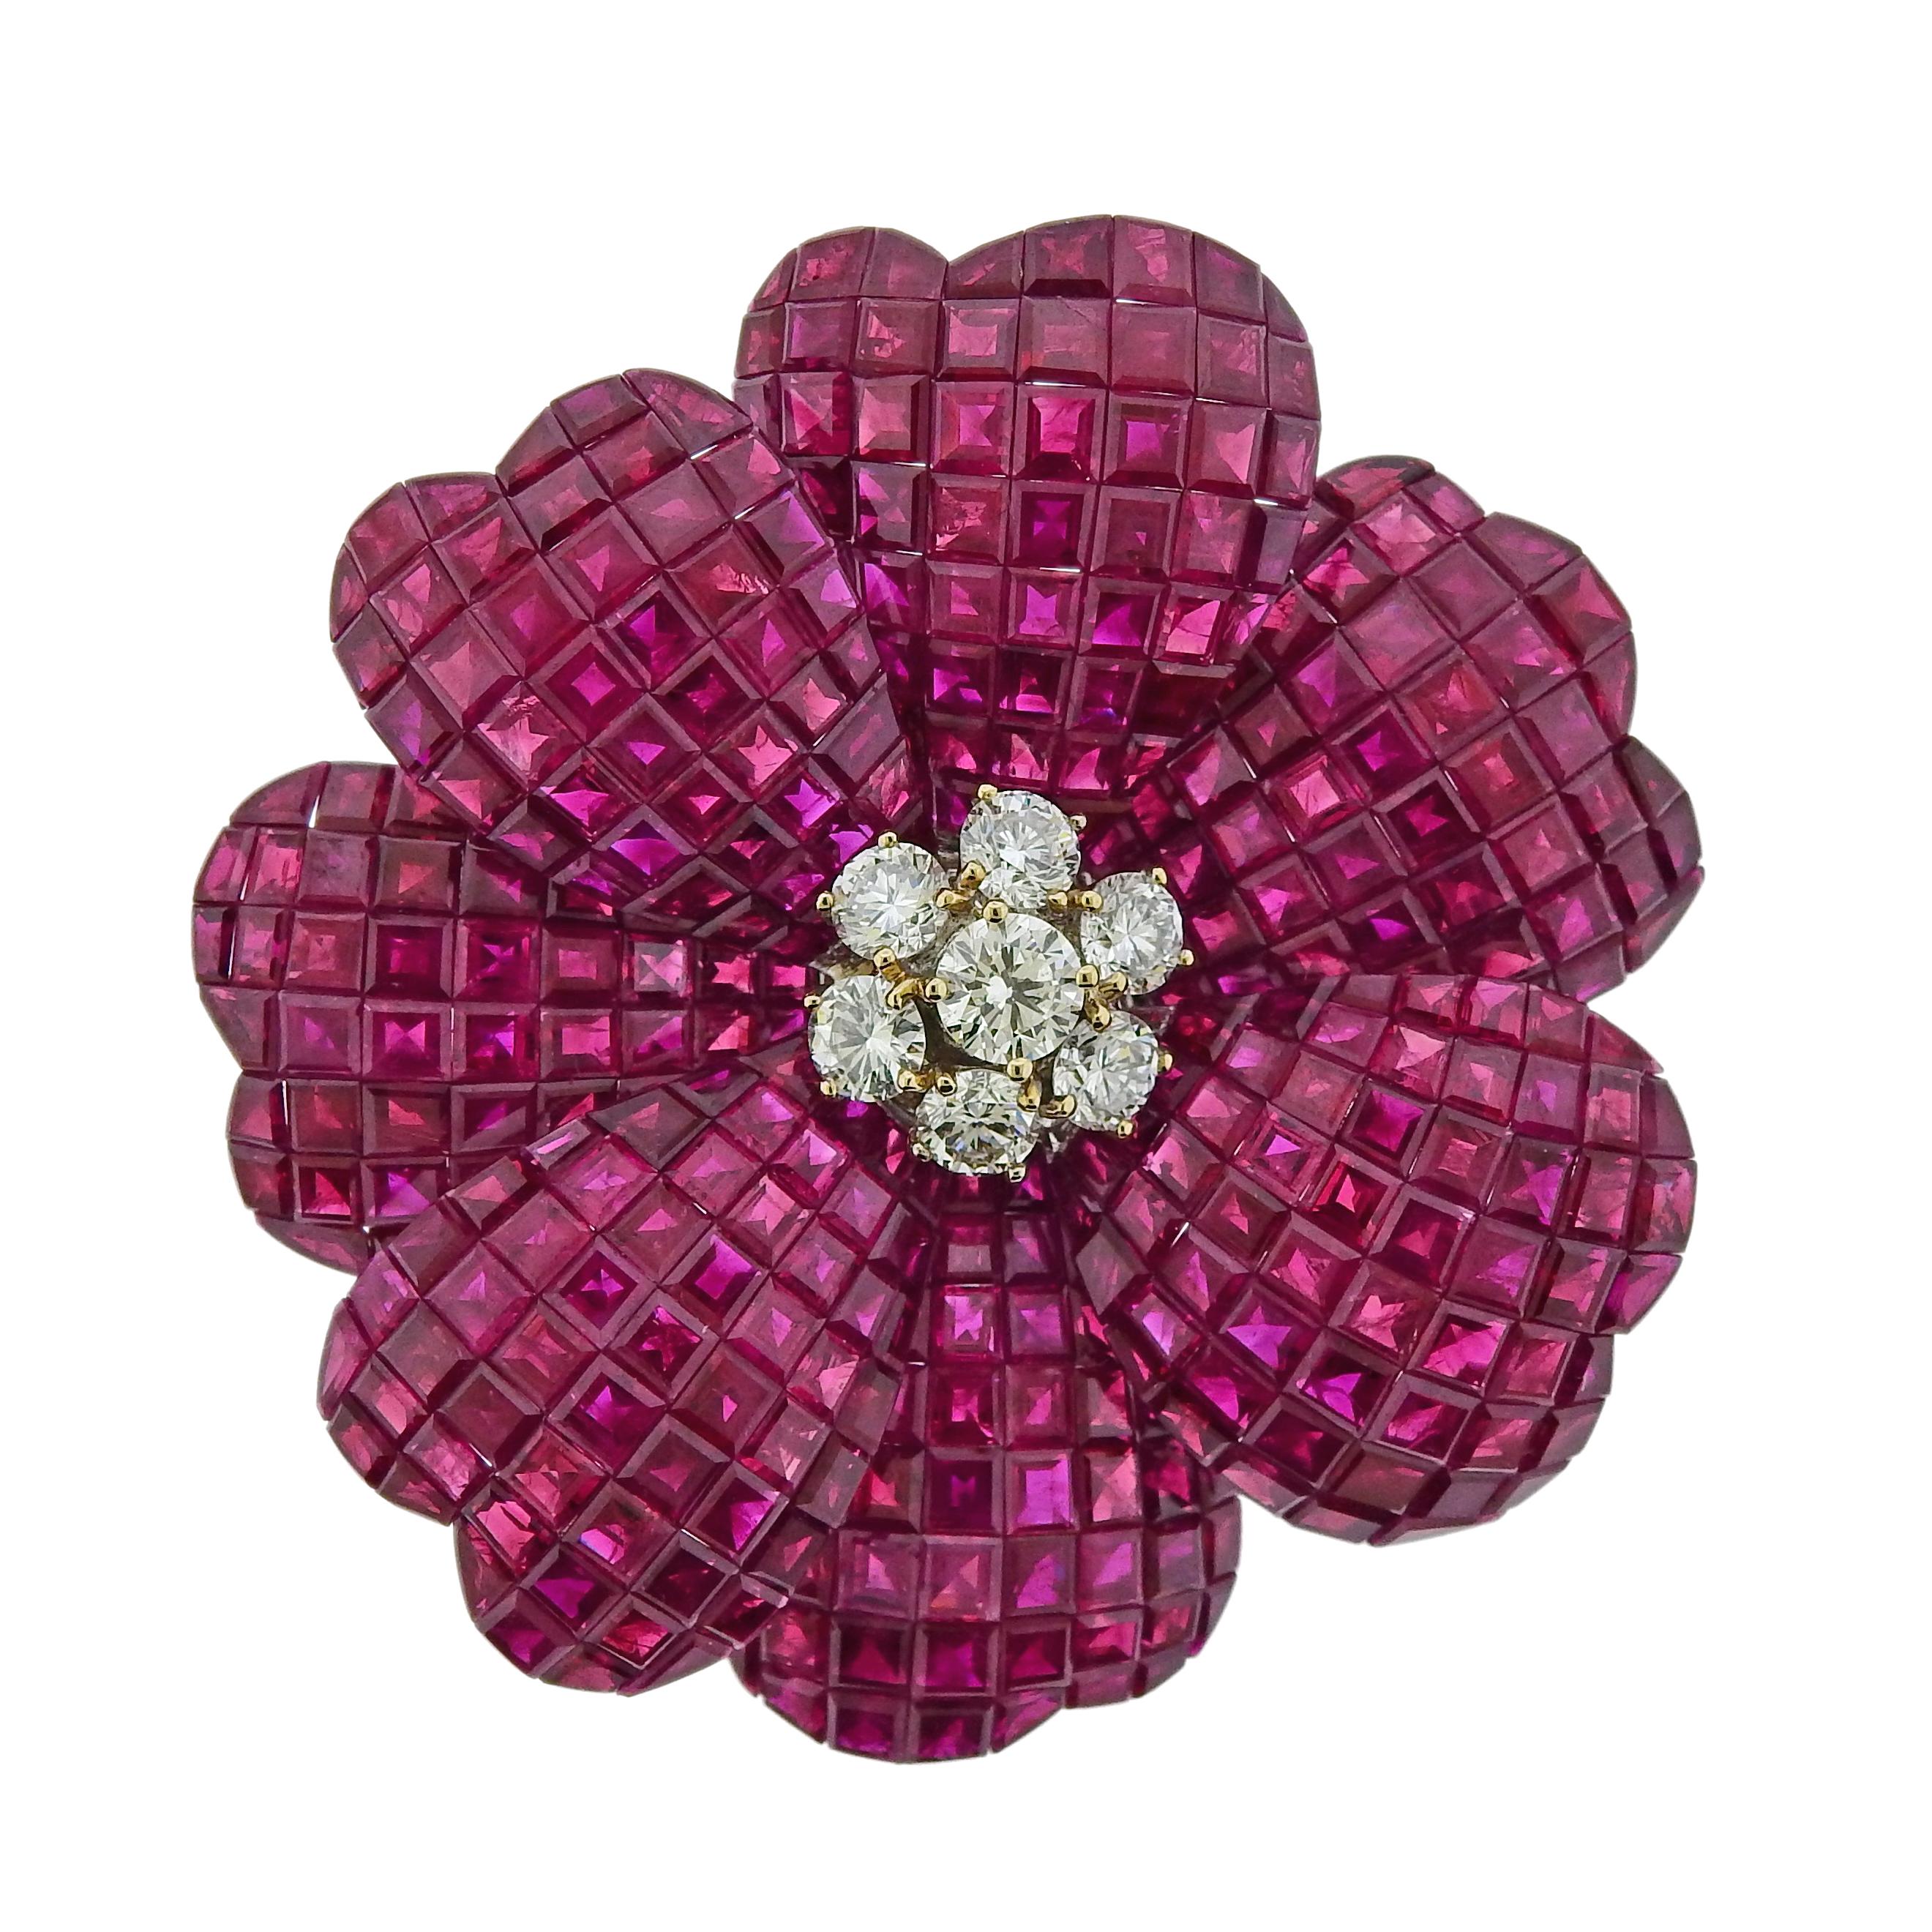 Very beautiful intense to vivid color ruby brooch. Total weight of the rubies is 69.98 cts, & total diamond weight is 1.84 cts. Approximate color of diamond is G-H and VS1 clarity, mounted in 18K white gold. 